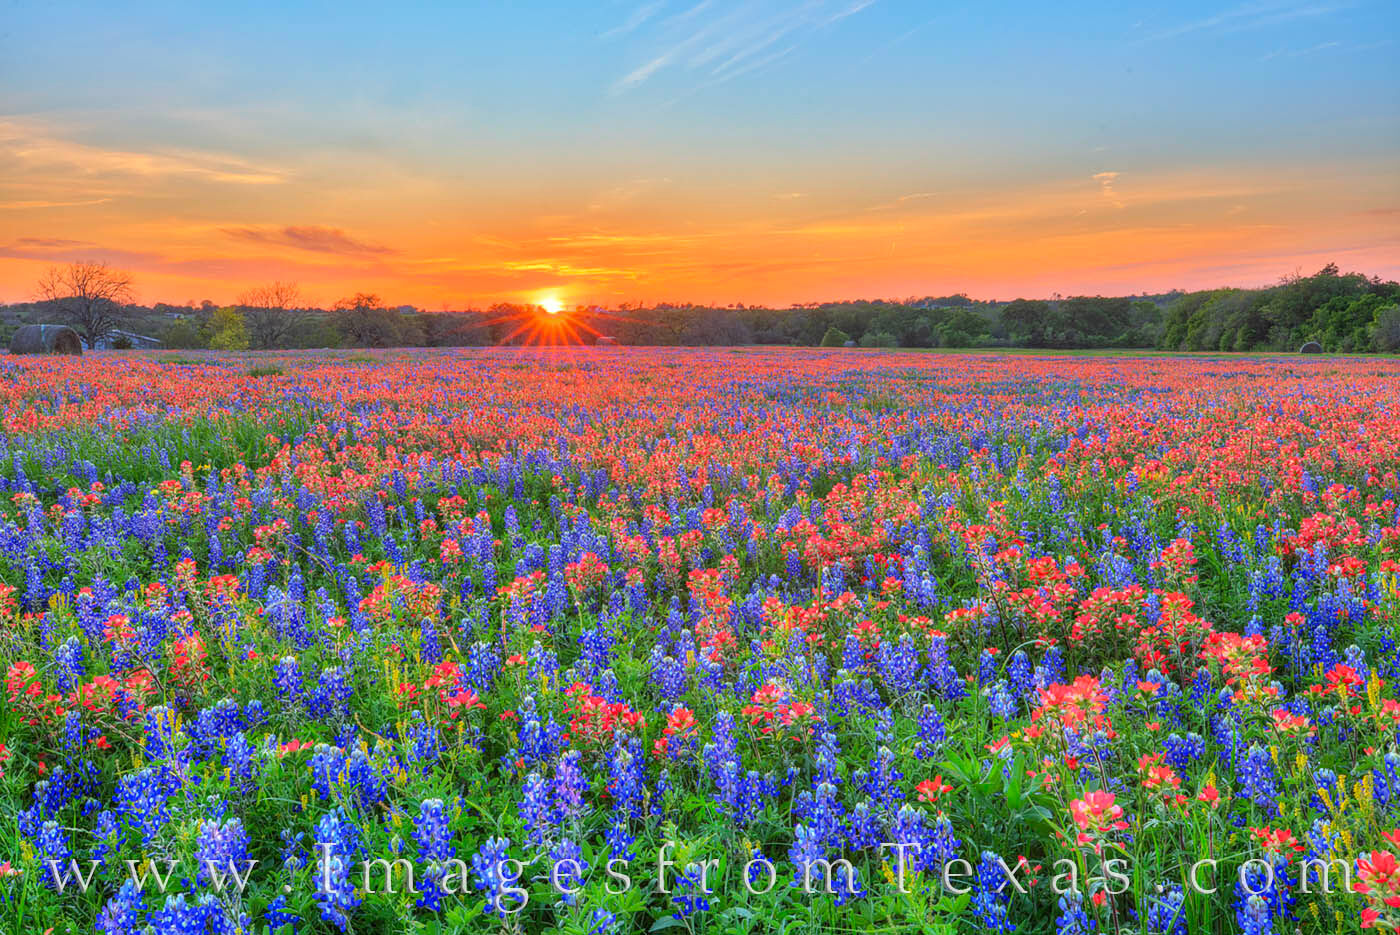 A splash of last light spreads acros a colorful field of Indian Blankets and bluebonnets on a cool spring evening near Shelby...